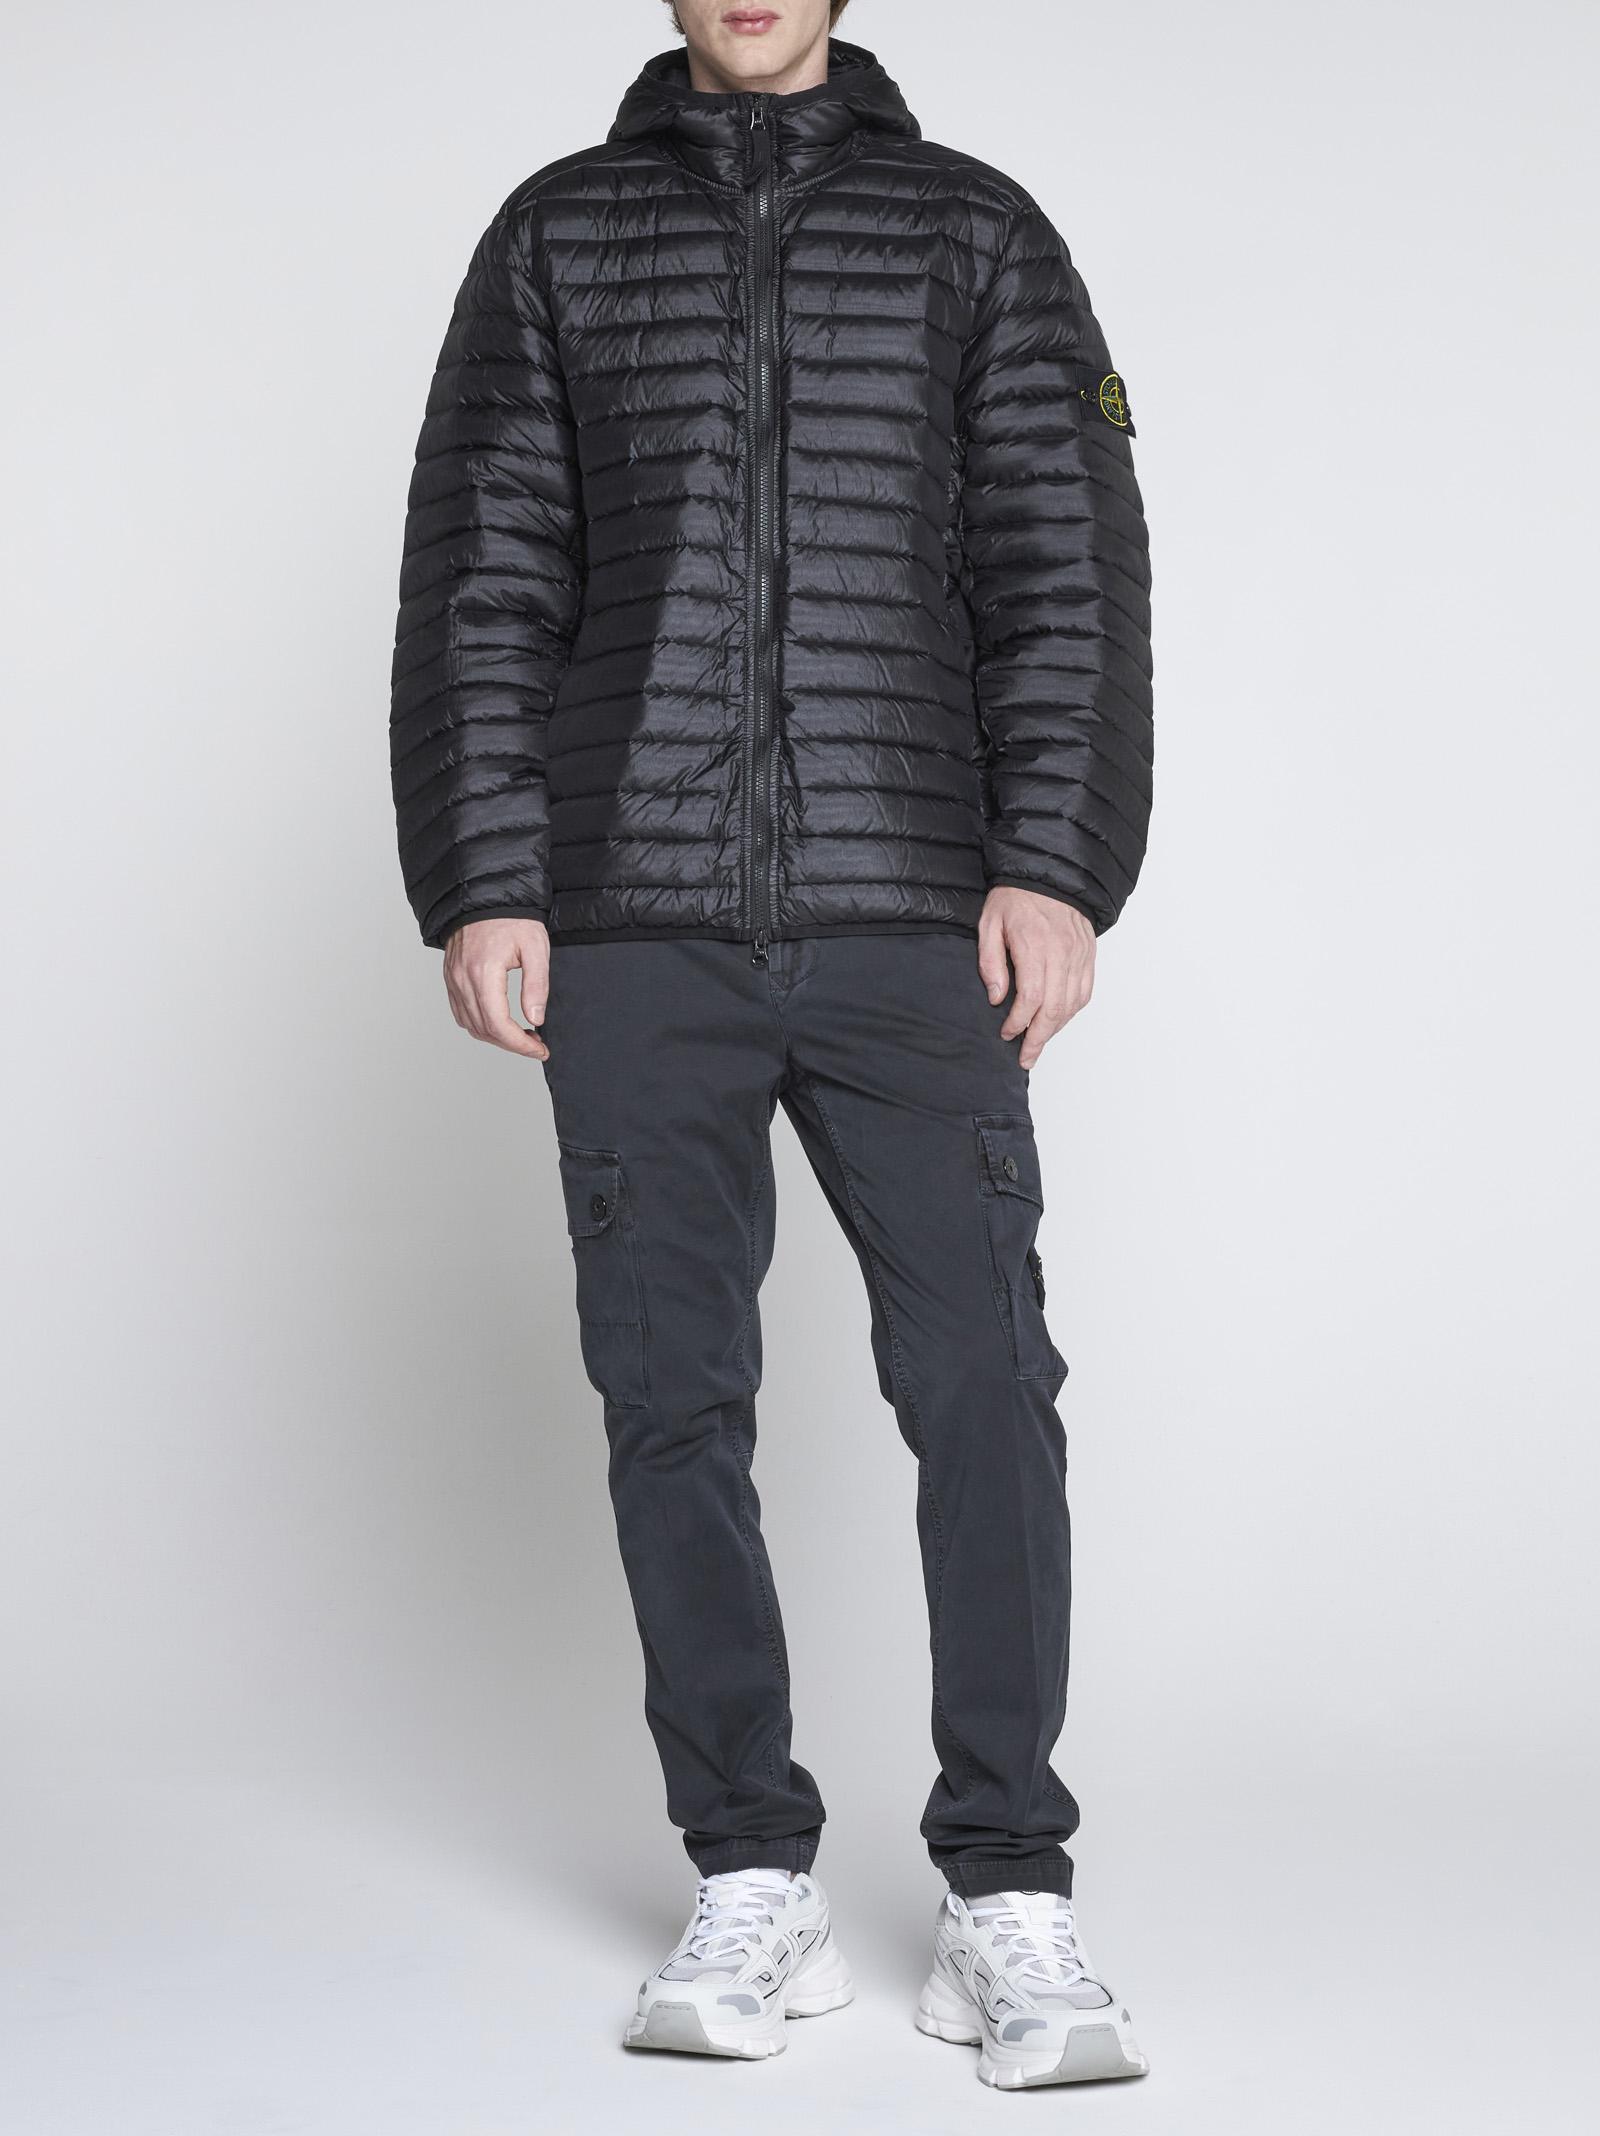 Stone Island Hooded Quilted Nylon Down Jacket in Black for Men | Lyst